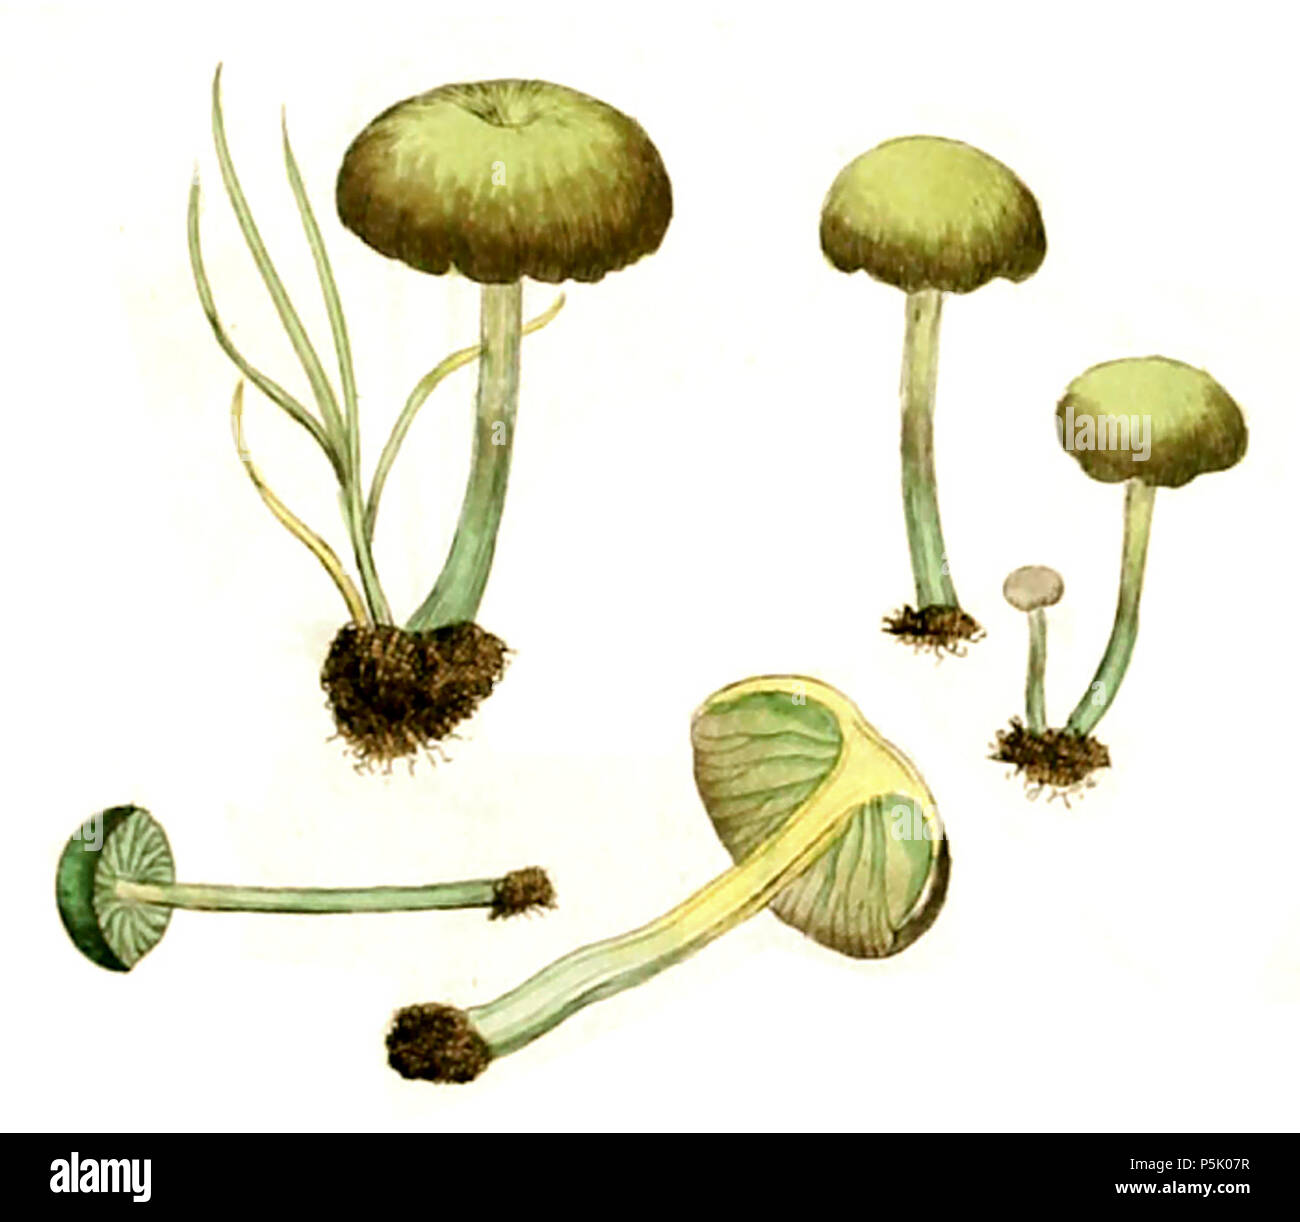 N/A. English: Mousepee Pinkgill (Entoloma incanum) Deutsch: Braungrüner Zärtling (Entoloma incanum) . 1797.   James Sowerby  (1757–1822)      Alternative names Sowerby  Description illustrator, naturalist and publisher father of James de Carle Sowerby, father of George Brettingham Sowerby I  Date of birth/death 21 March 1757 25 October 1822  Location of birth/death Lambeth, London, England Lambeth, London, England  Work location London, England  Authority control  : Q1235813 VIAF:61879779 ISNI:0000 0000 8141 5785 ULAN:500128681 LCCN:n86854905 NLA:36199719 WorldCat 26 1797 Coloured Figures of E Stock Photo